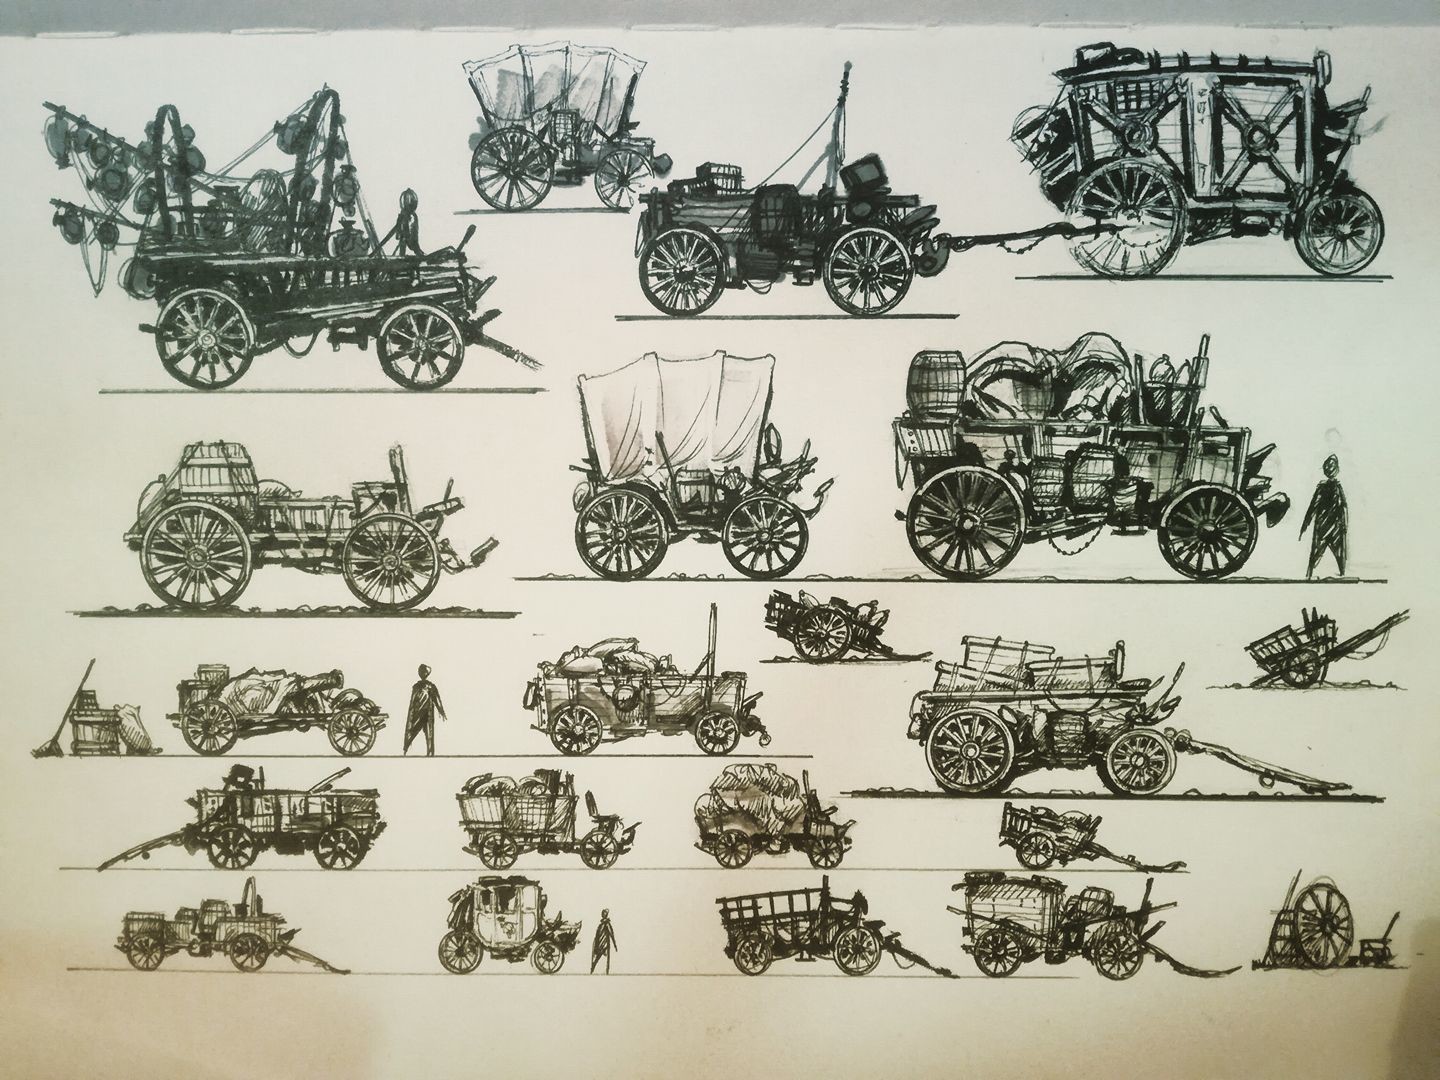 Cart, Carriage and Wagon concepts, these might be used as moving, working vehicles or static props.